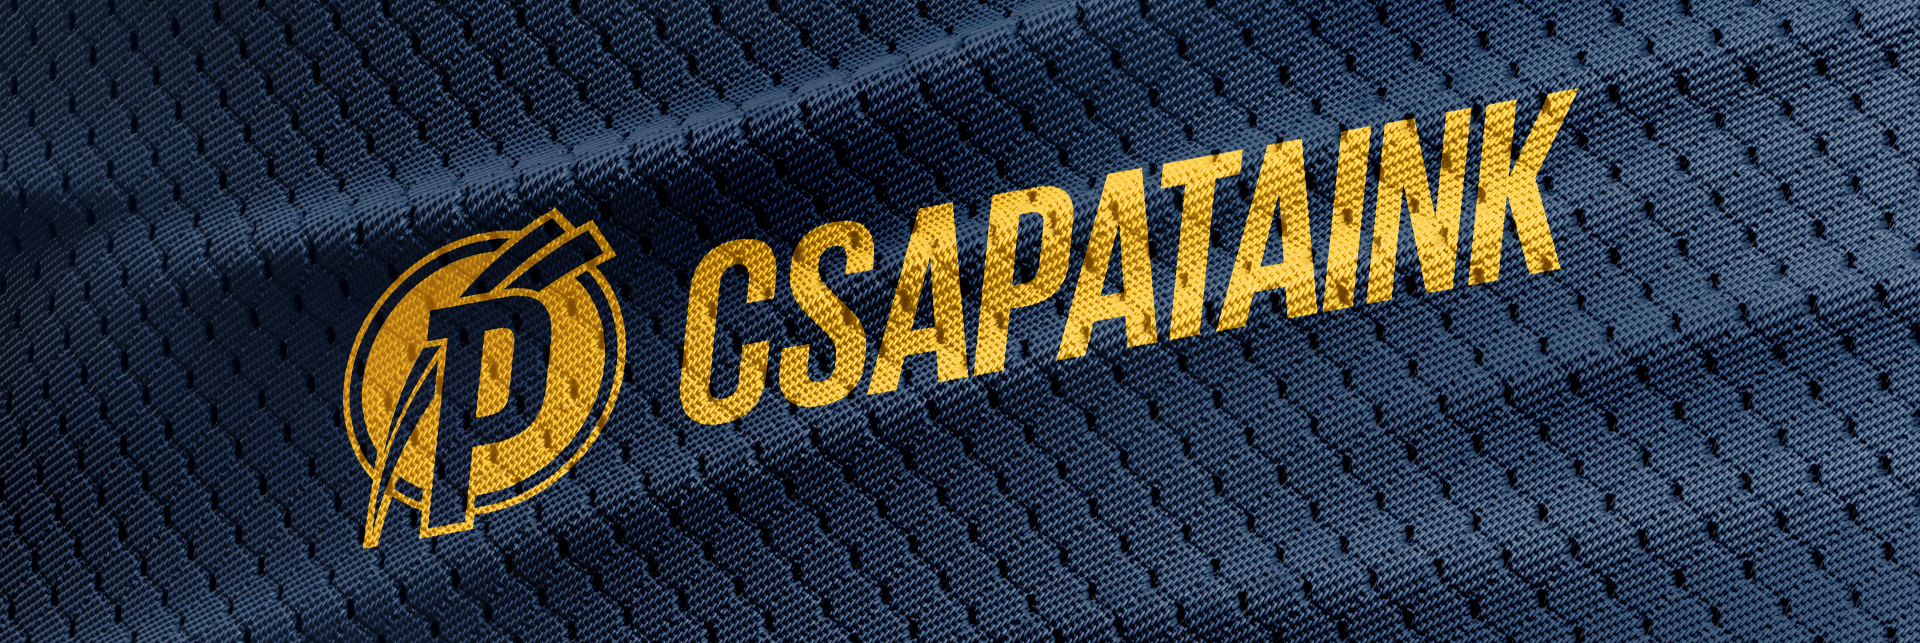 Csapataink